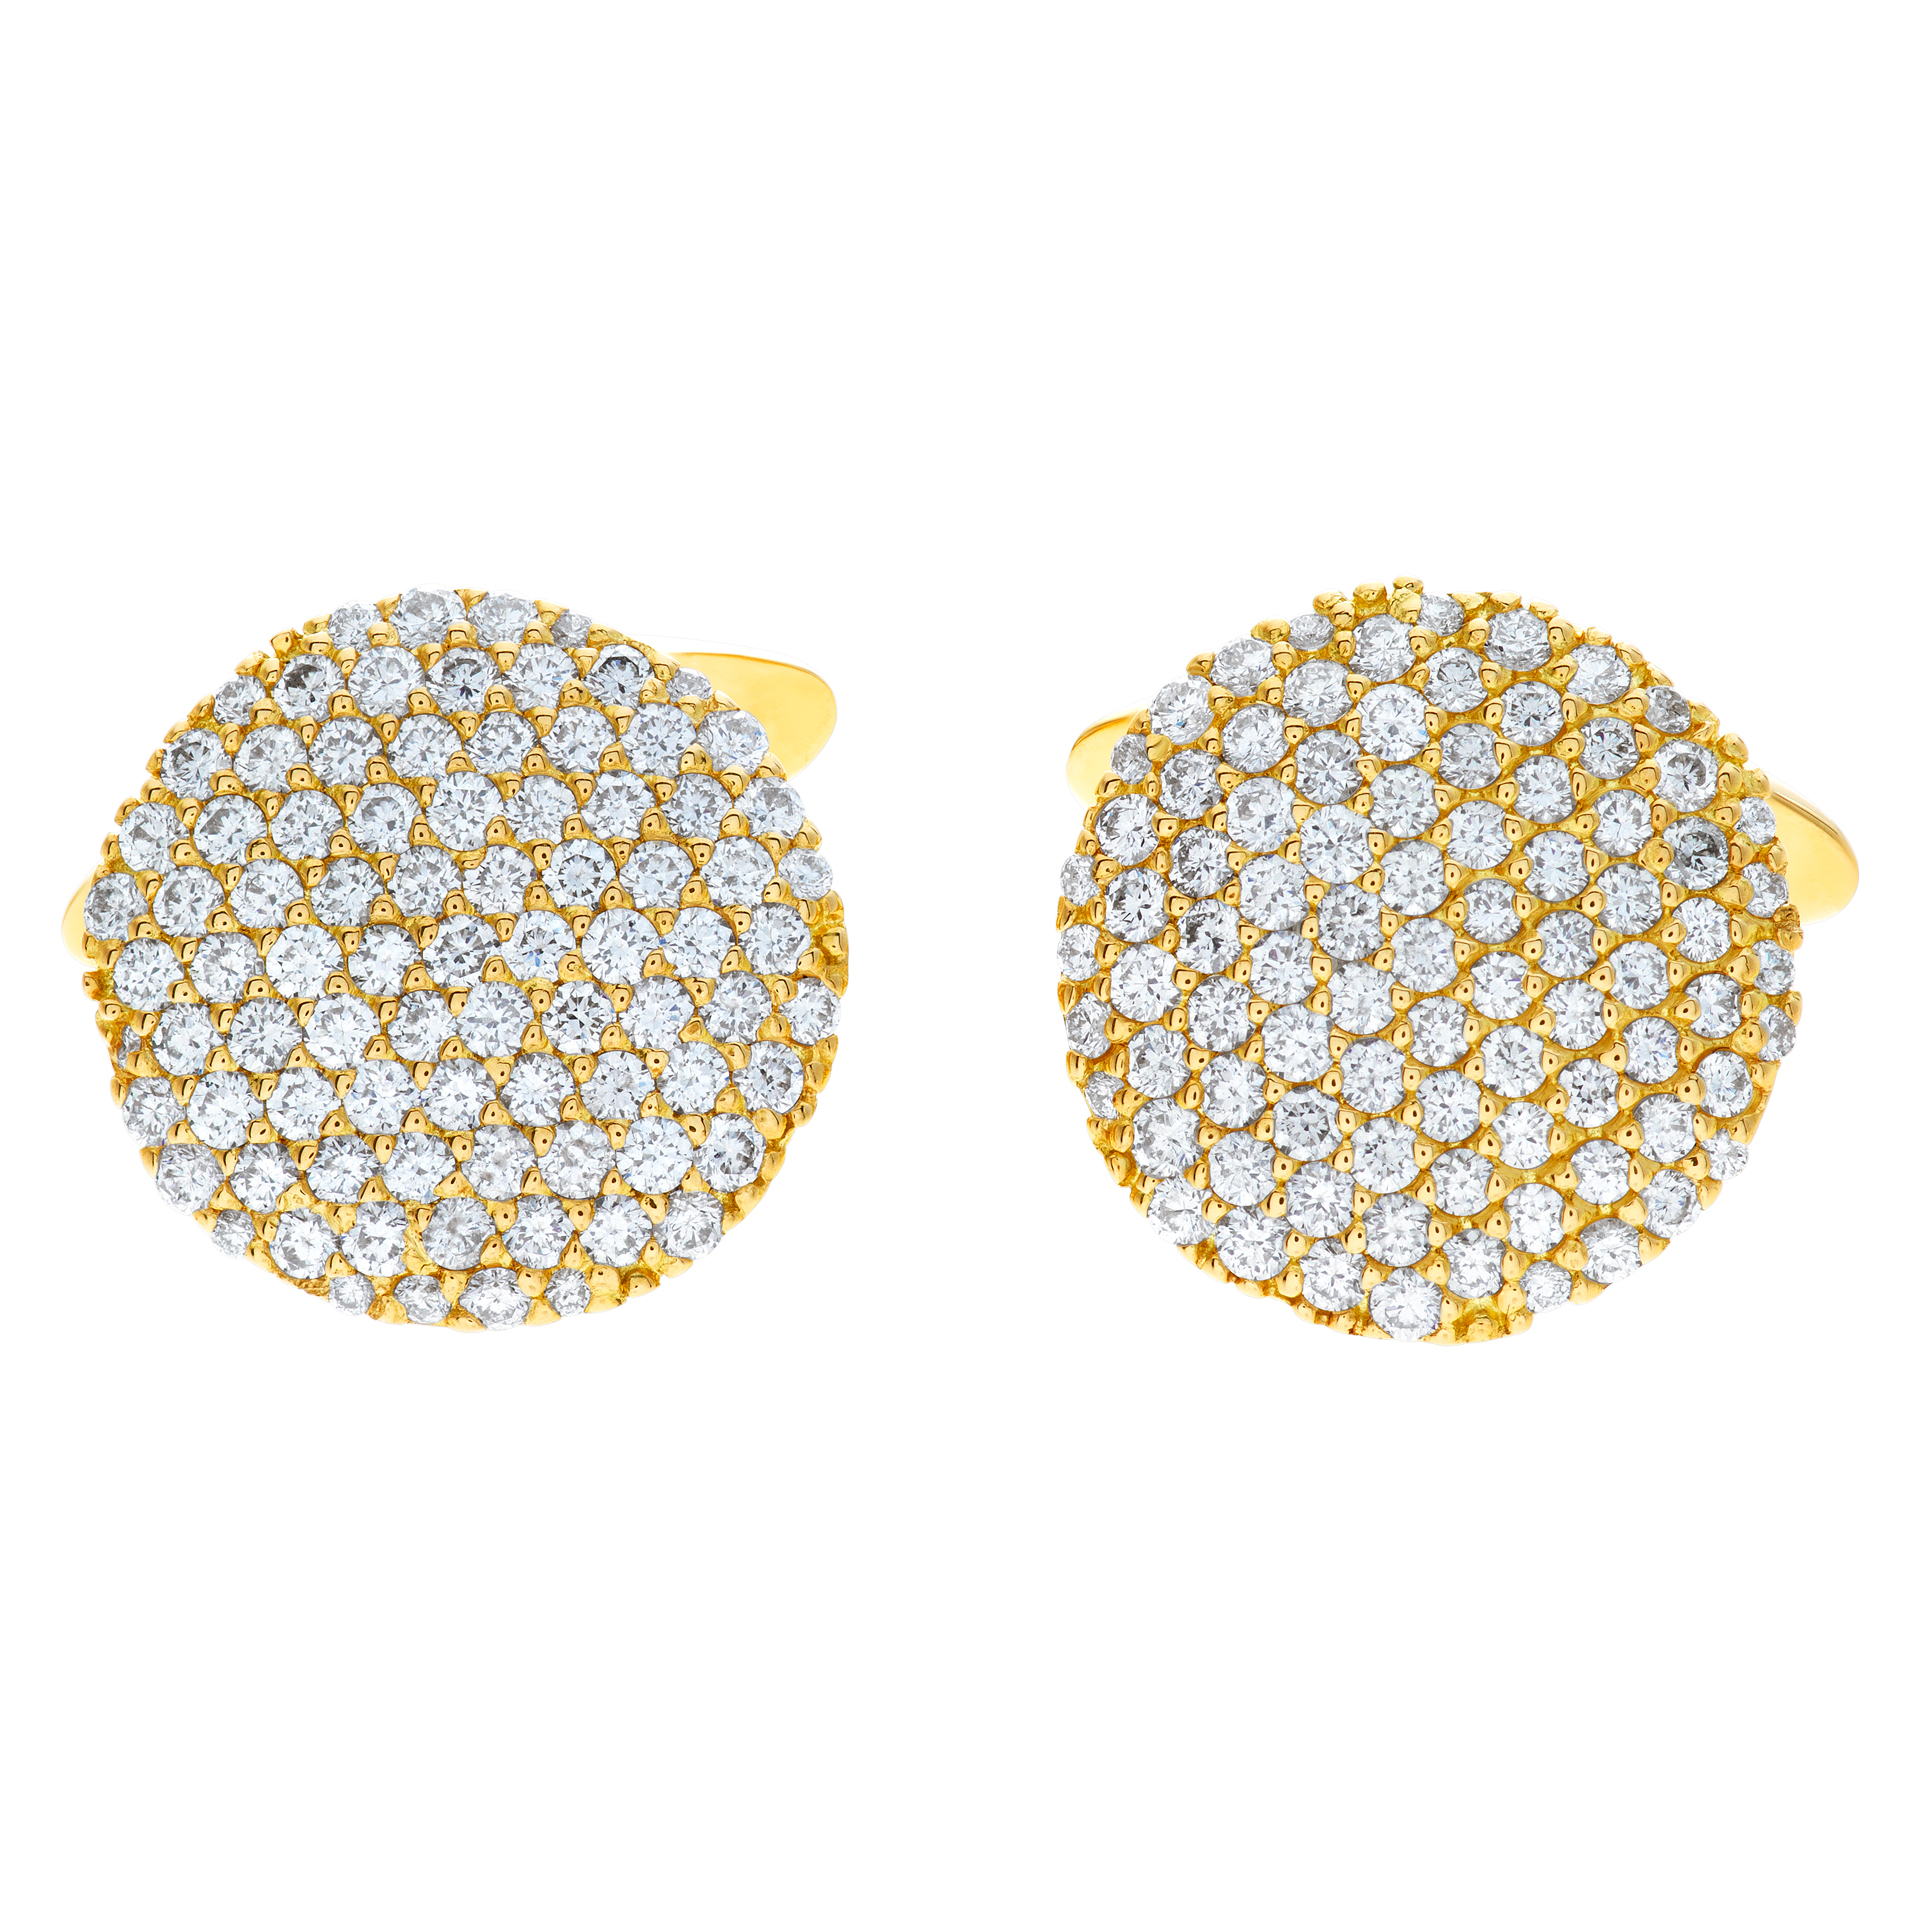 18k yellow gold pave set circle cufflinks with 2.5 carats in diamonds